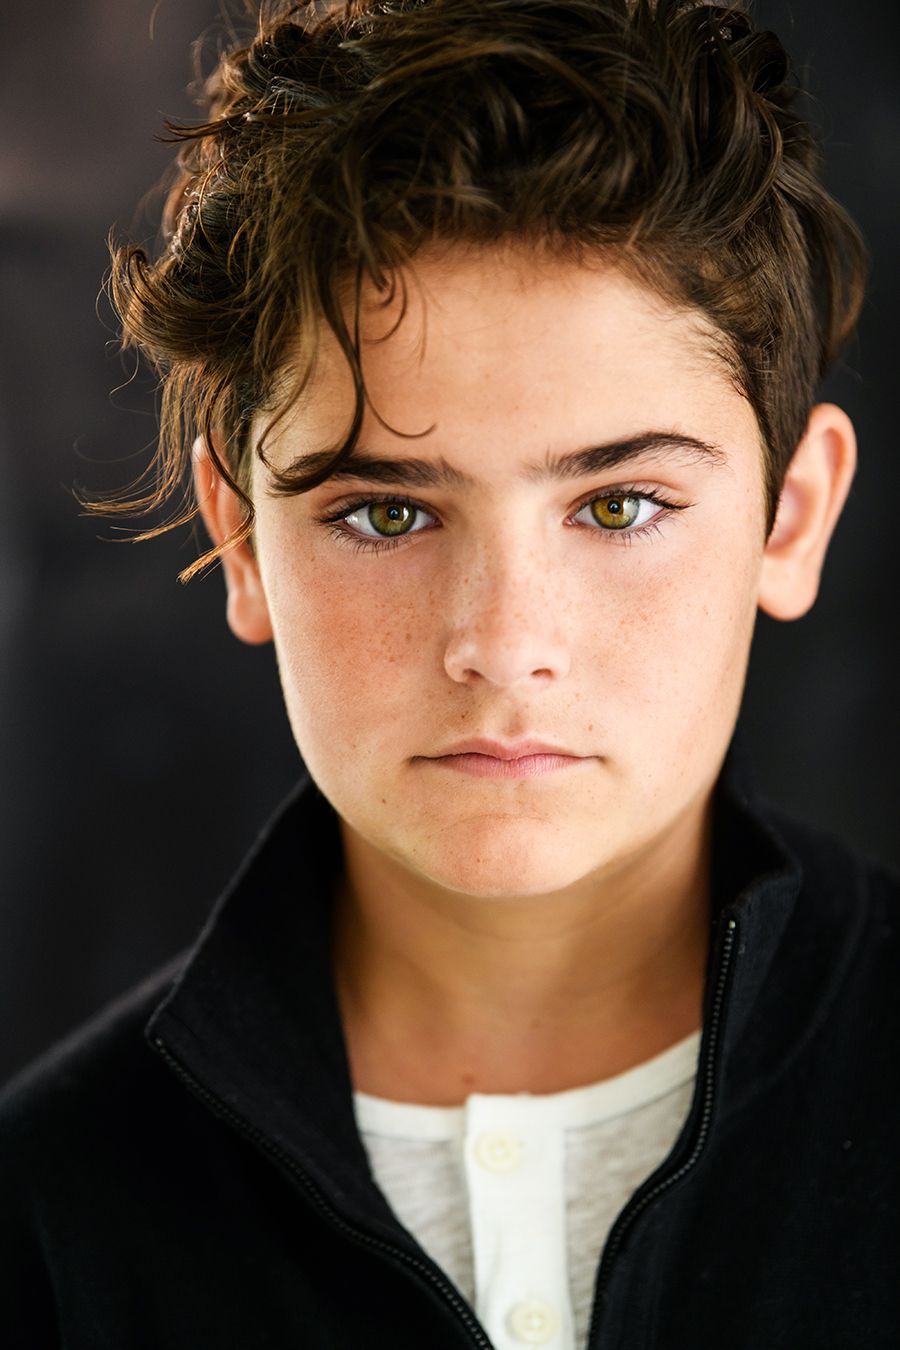 Ezra James Lerario (Actor) Wiki, Biography, Age, Girlfriends, Family, Facts and More